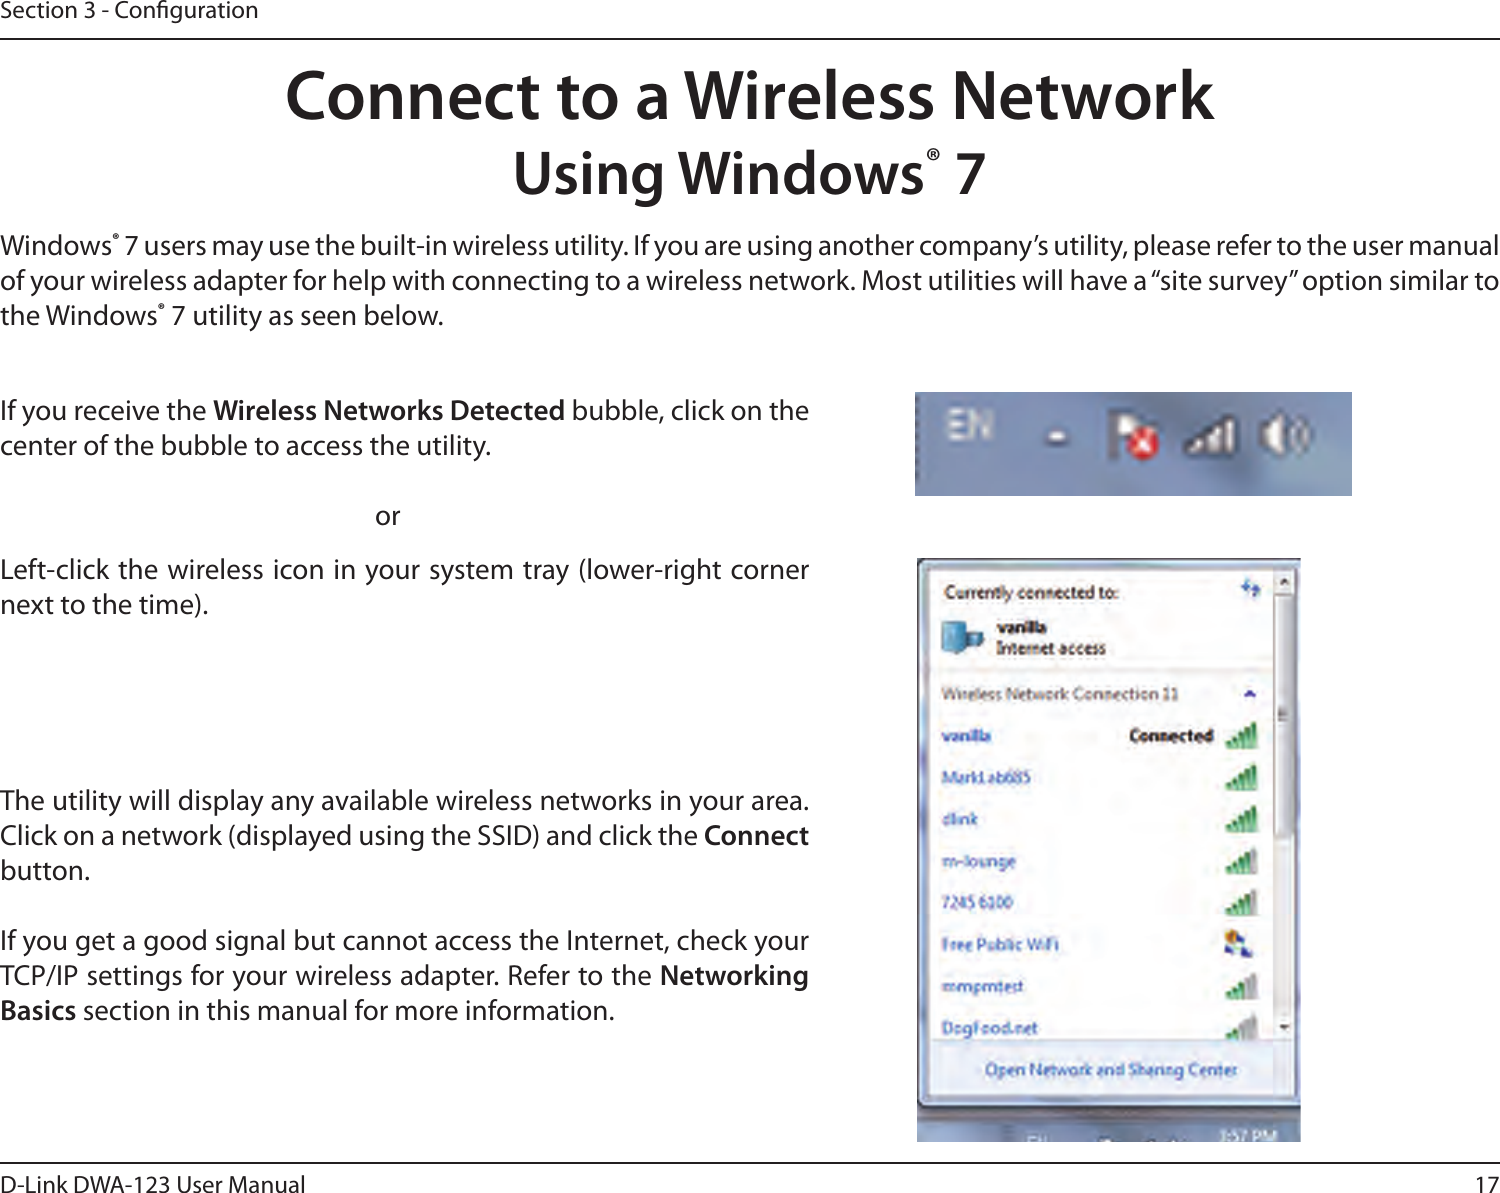 17D-Link DWA-123 User ManualSection 3 - CongurationConnect to a Wireless NetworkUsing Windows® 7Windows® 7 users may use the built-in wireless utility. If you are using another company’s utility, please refer to the user manual of your wireless adapter for help with connecting to a wireless network. Most utilities will have a “site survey” option similar to the Windows® 7 utility as seen below.Left-click the wireless icon in your system tray (lower-right corner next to the time).If you receive the Wireless Networks Detected bubble, click on the center of the bubble to access the utility.     orThe utility will display any available wireless networks in your area. Click on a network (displayed using the SSID) and click the Connect button.If you get a good signal but cannot access the Internet, check your TCP/IP settings for your wireless adapter. Refer to the Networking Basics section in this manual for more information.